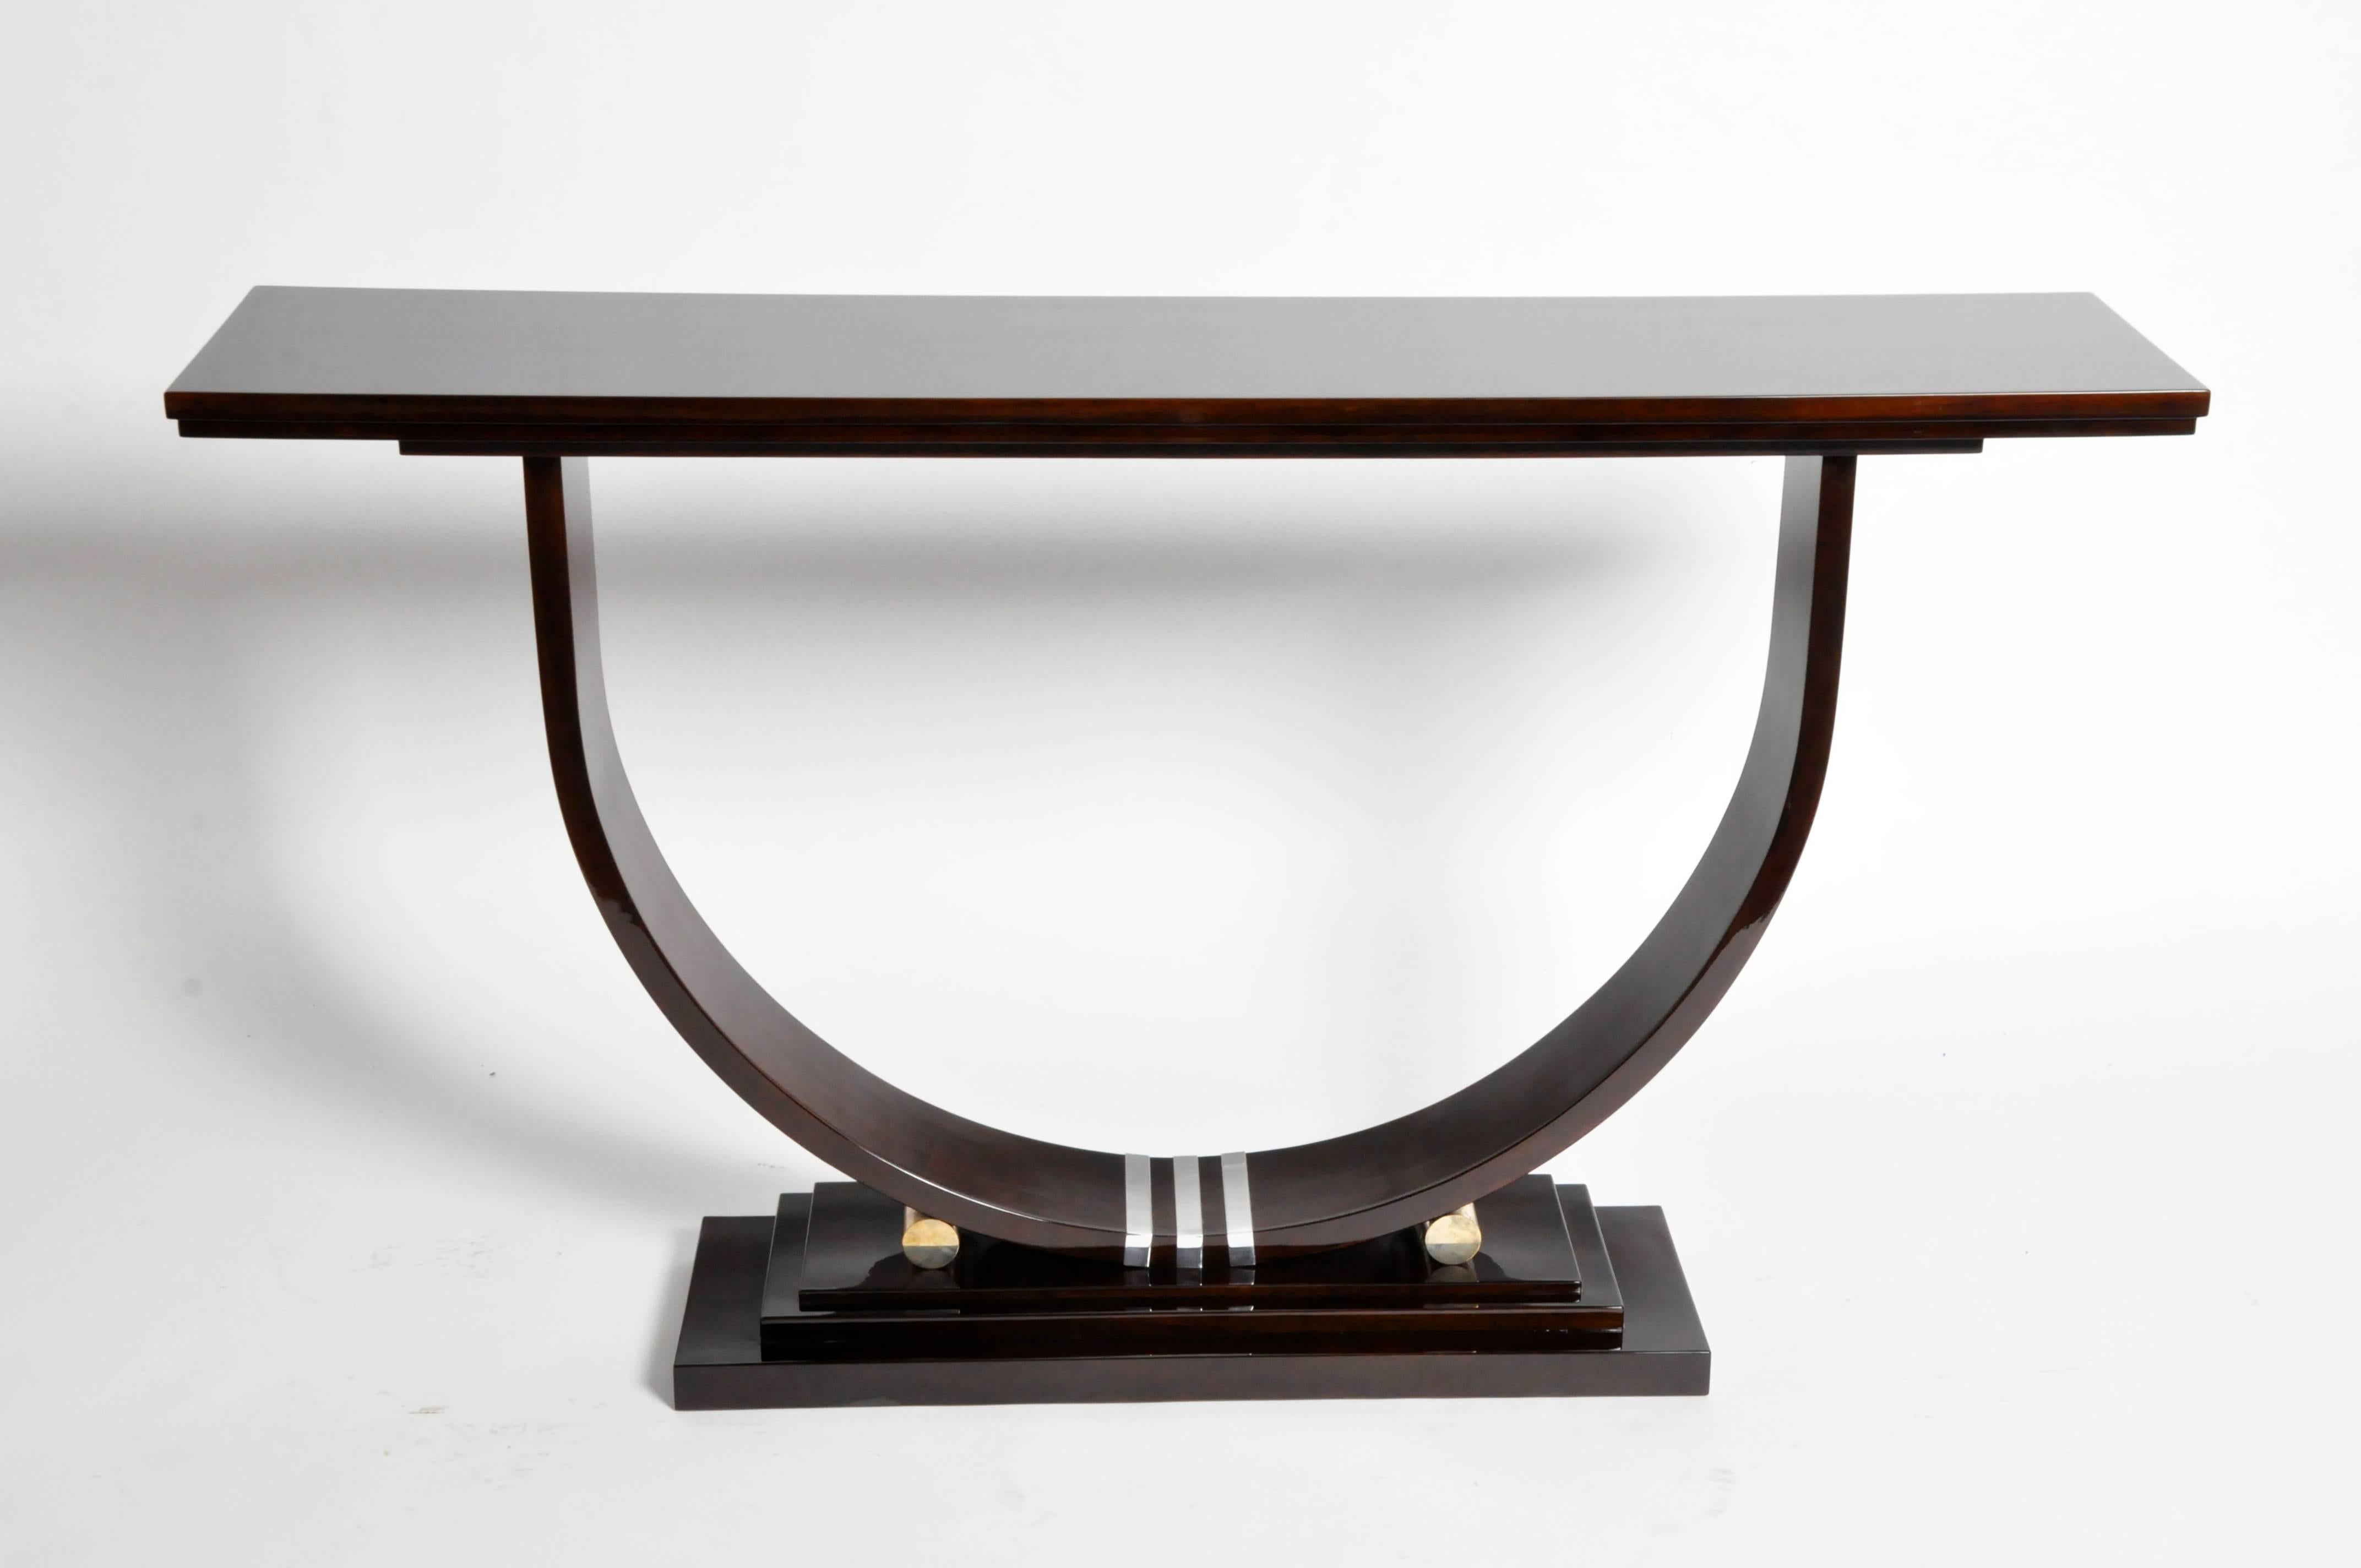 Stunning Mid-Century style console with dark walnut veneer and chrome accents. This piece imparts a chic, architectural elegance with its fine lines and u-shaped base.